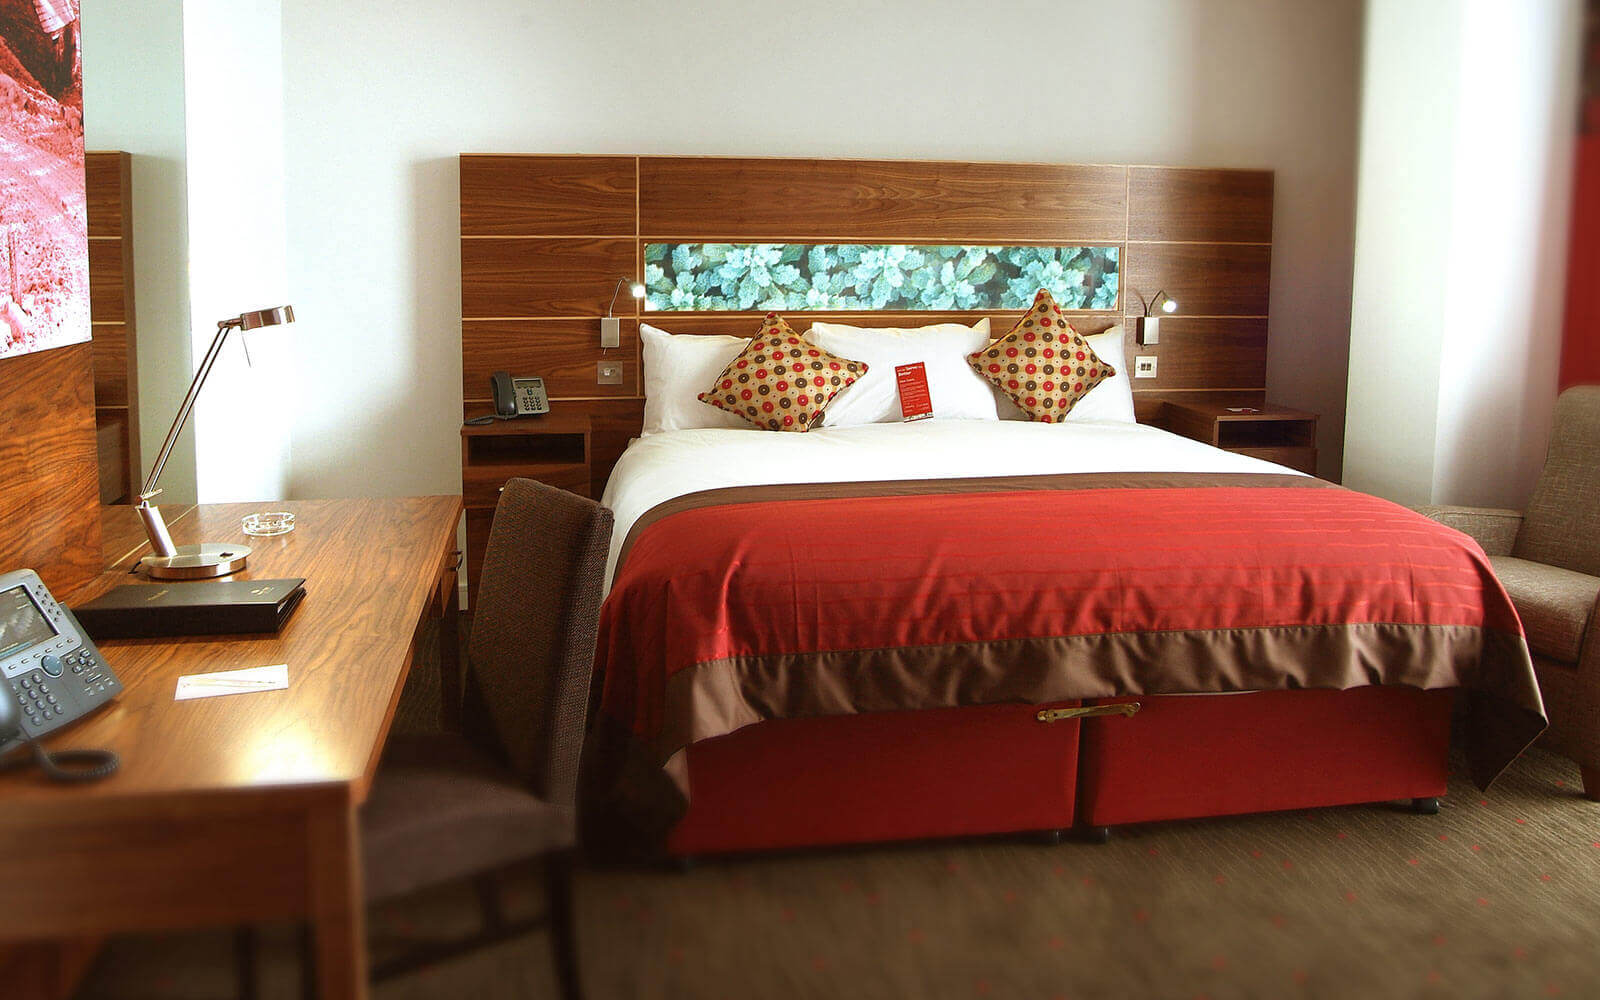 Bedroom in Crowne Plaza Dundalk with Comfortable Bed